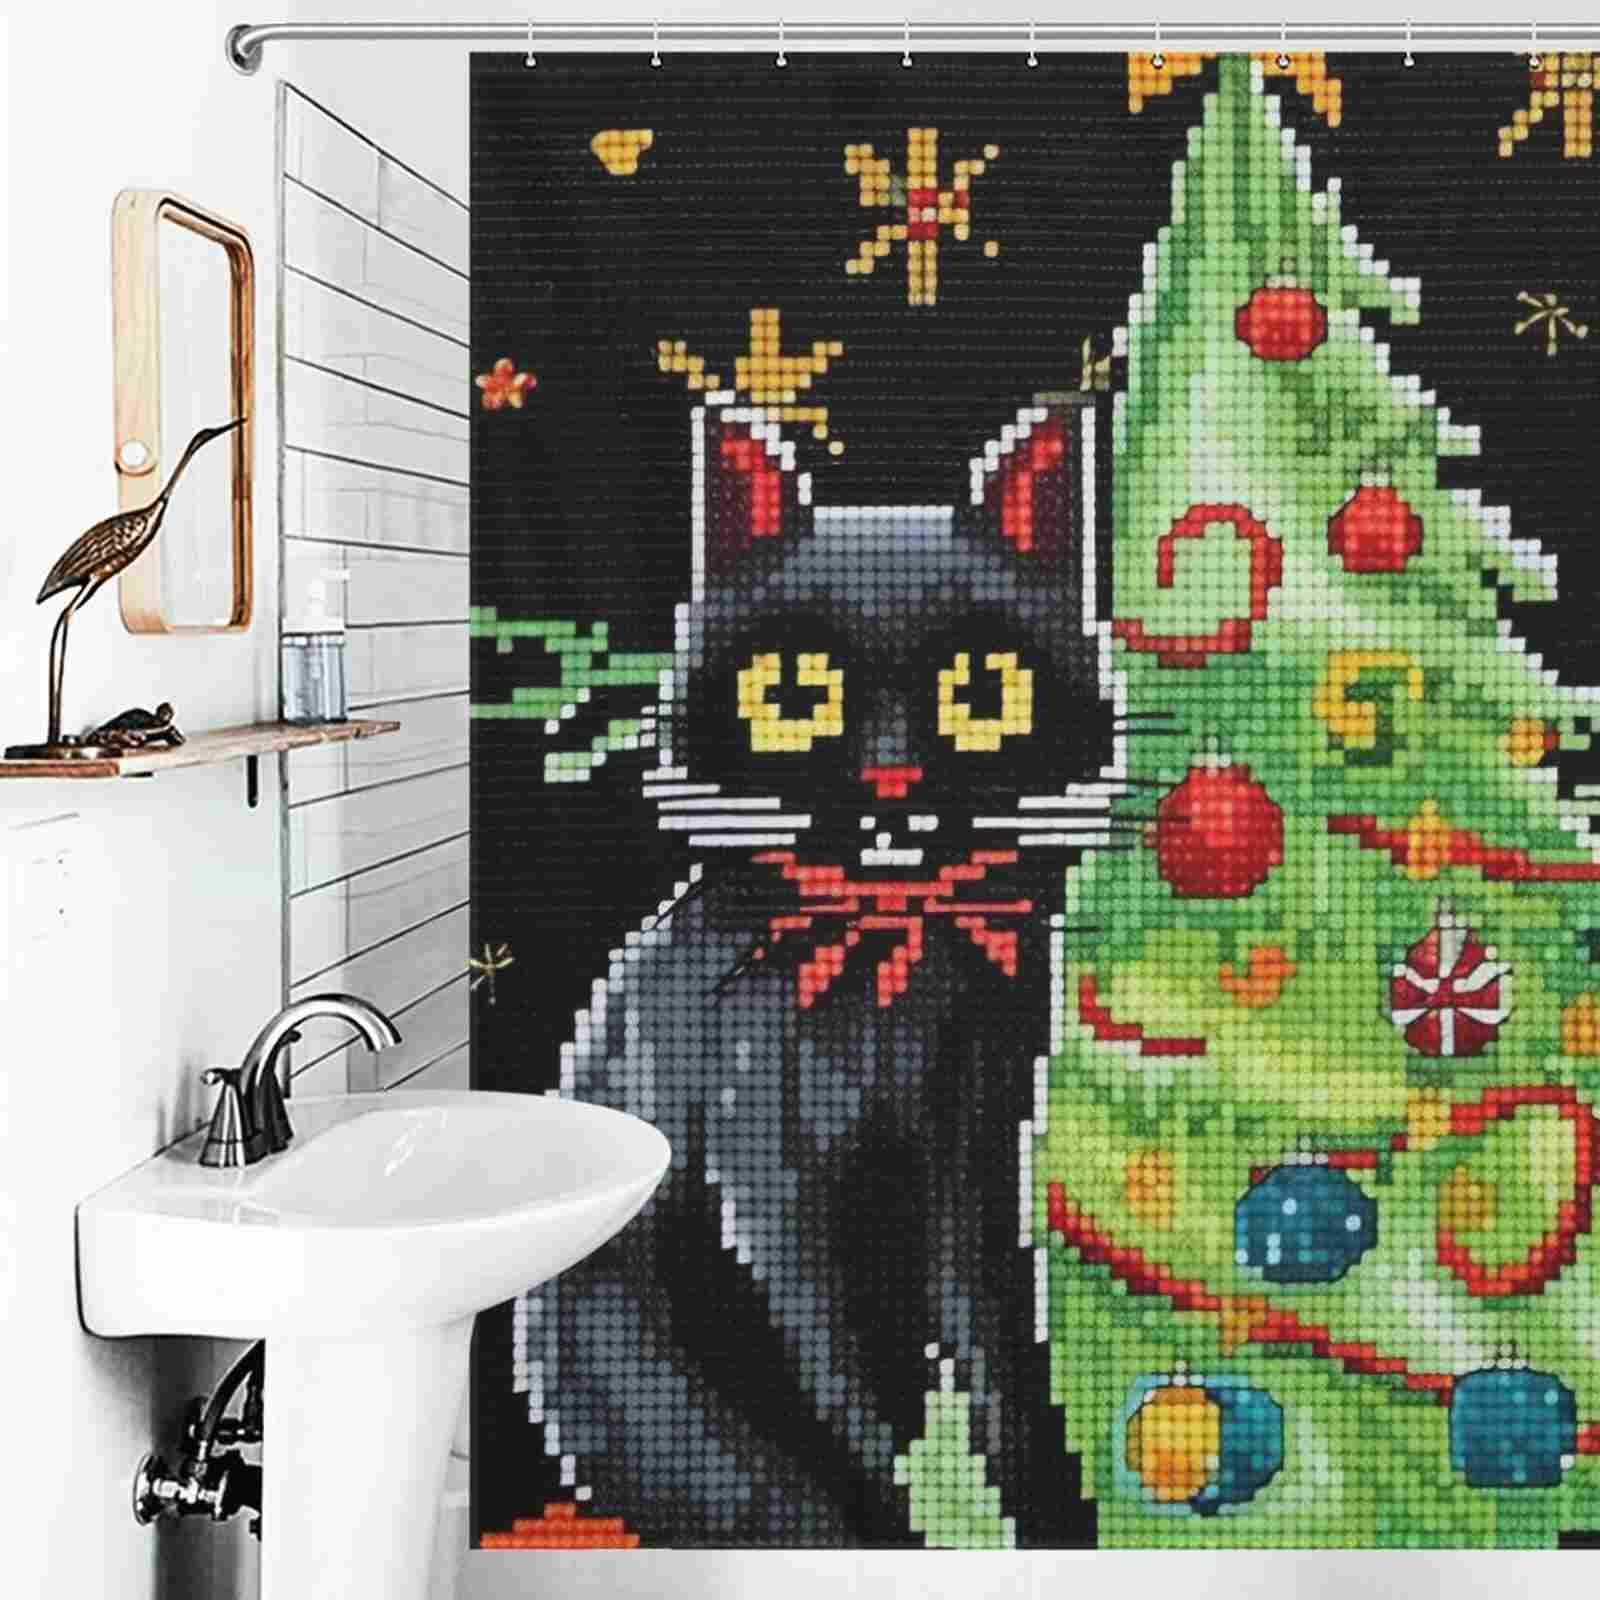 A bathroom with a Cotton Cat Funny Mosaic Black Cat Christmas shower curtain featuring a Funny Christmas tree design.